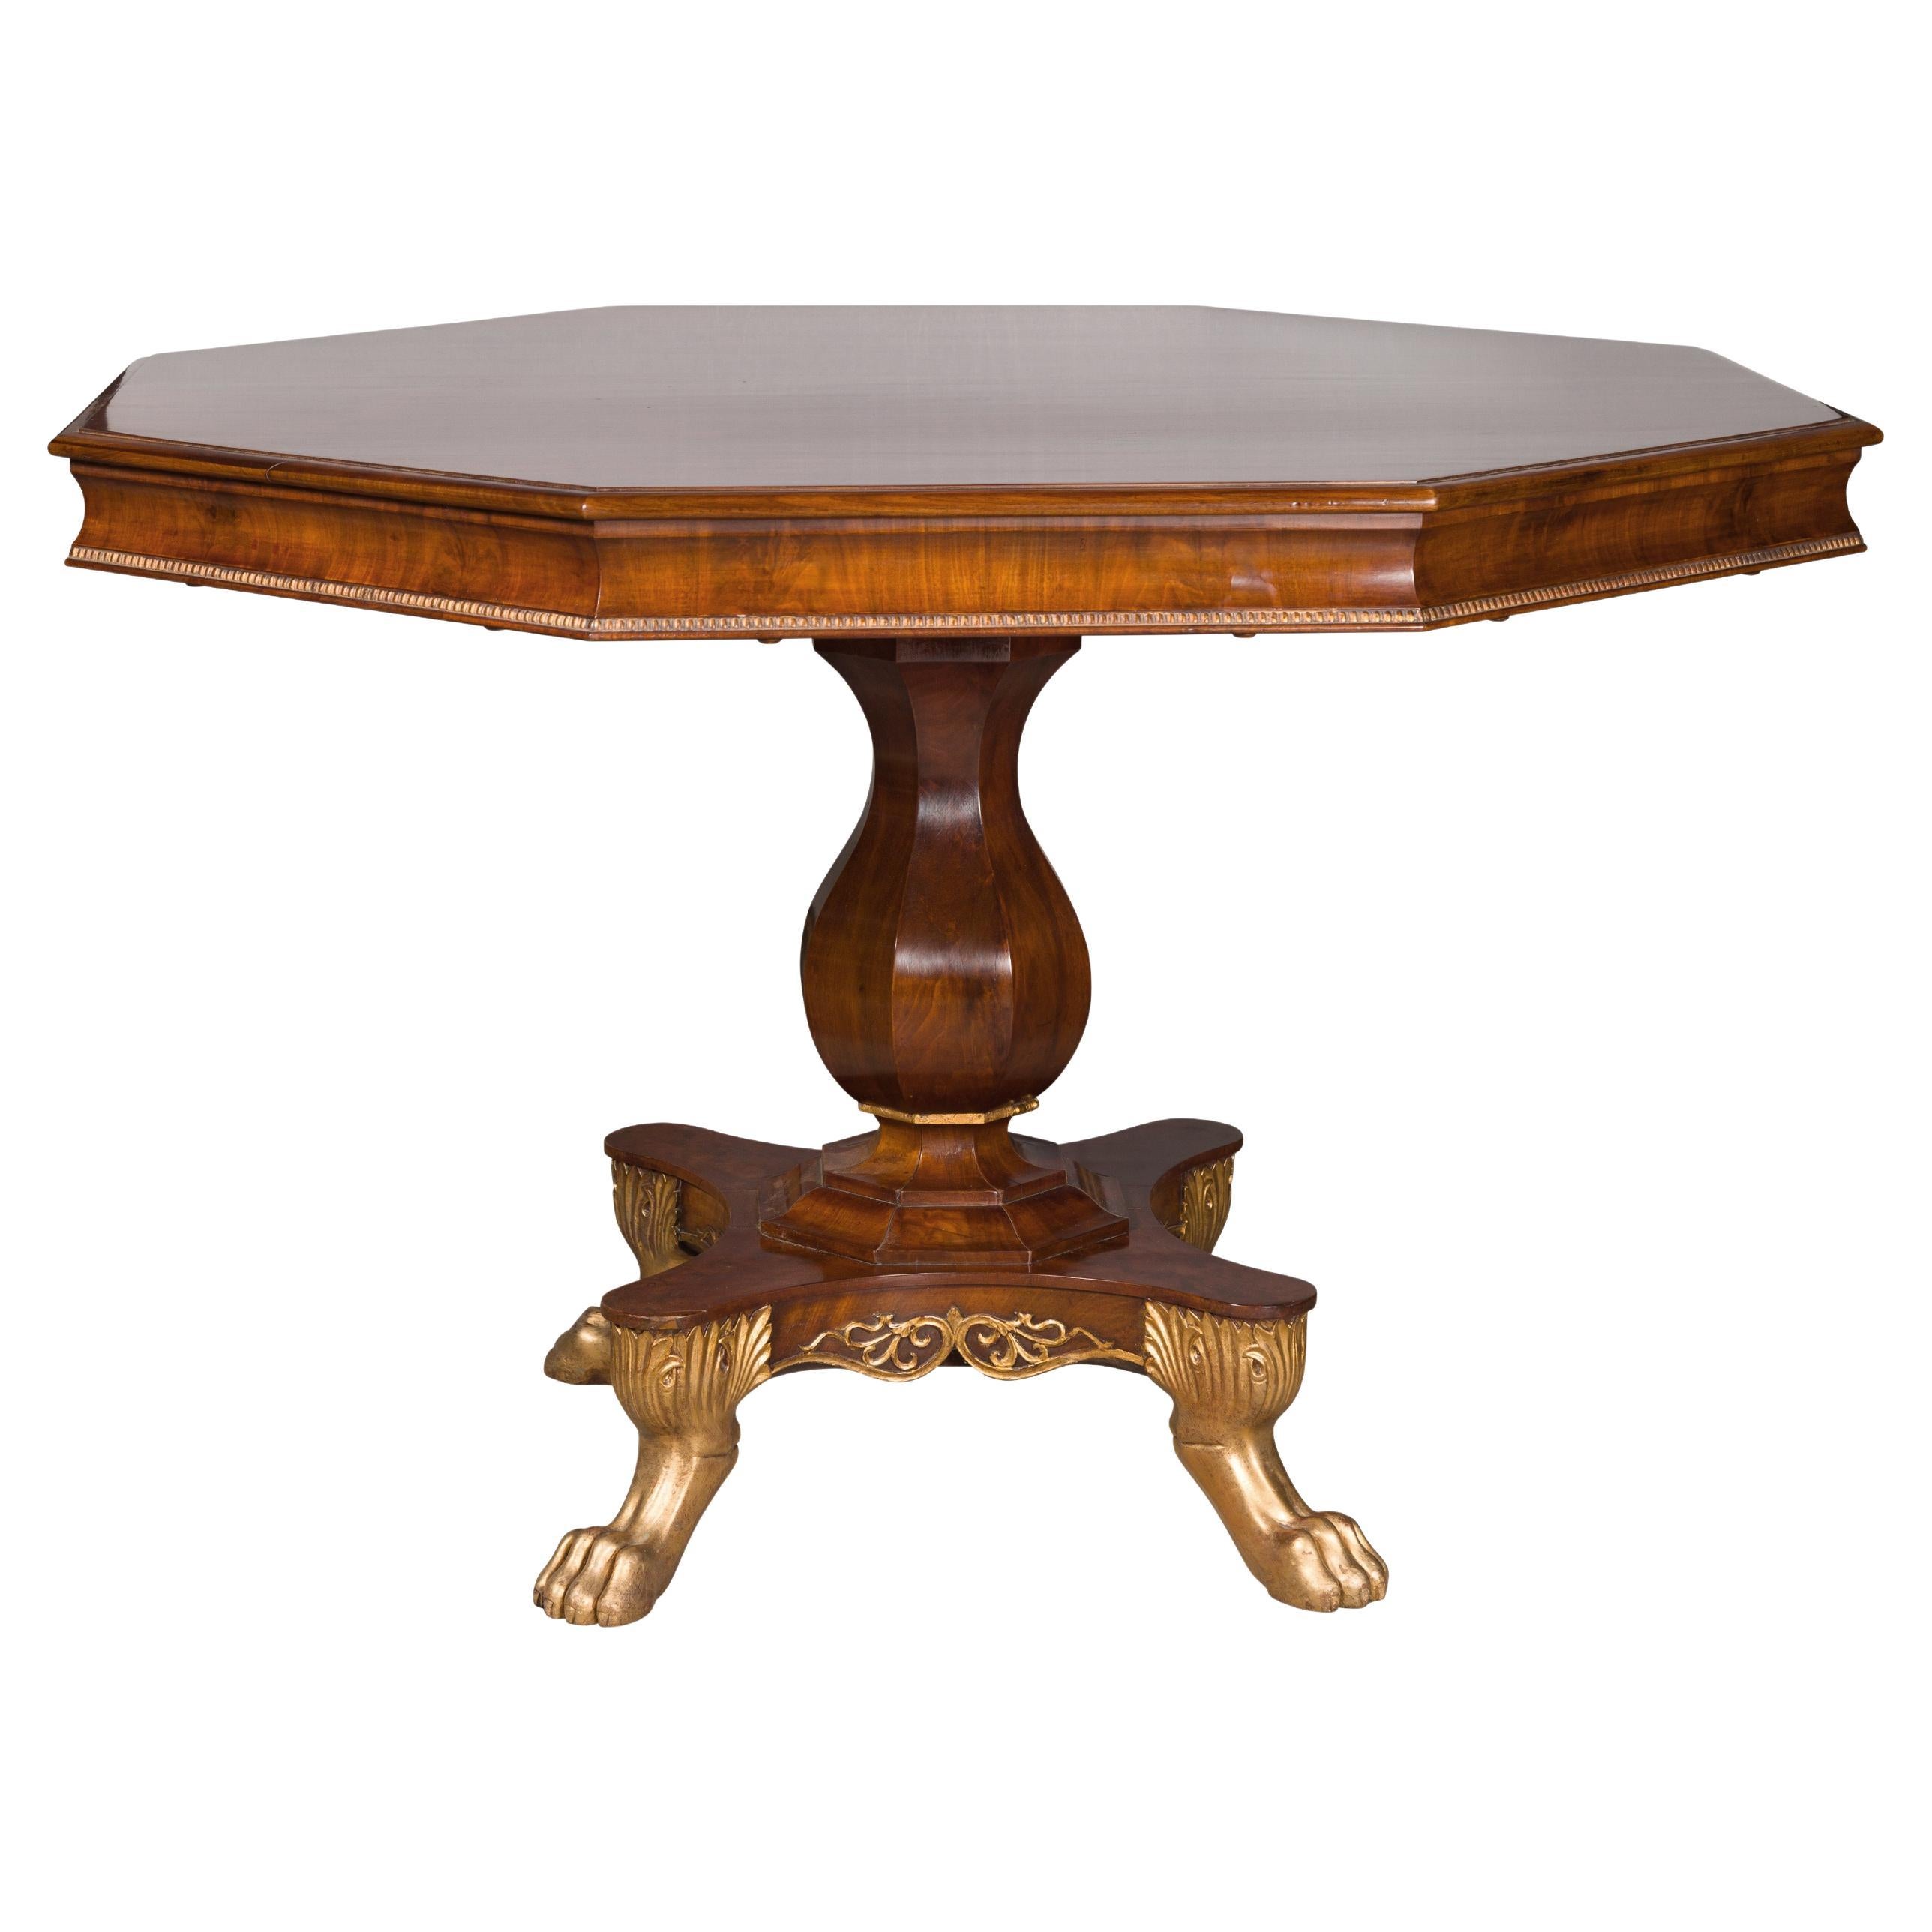 English Regency 1820s Mahogany Center Table with Octagonal Top and Gilt Paws For Sale